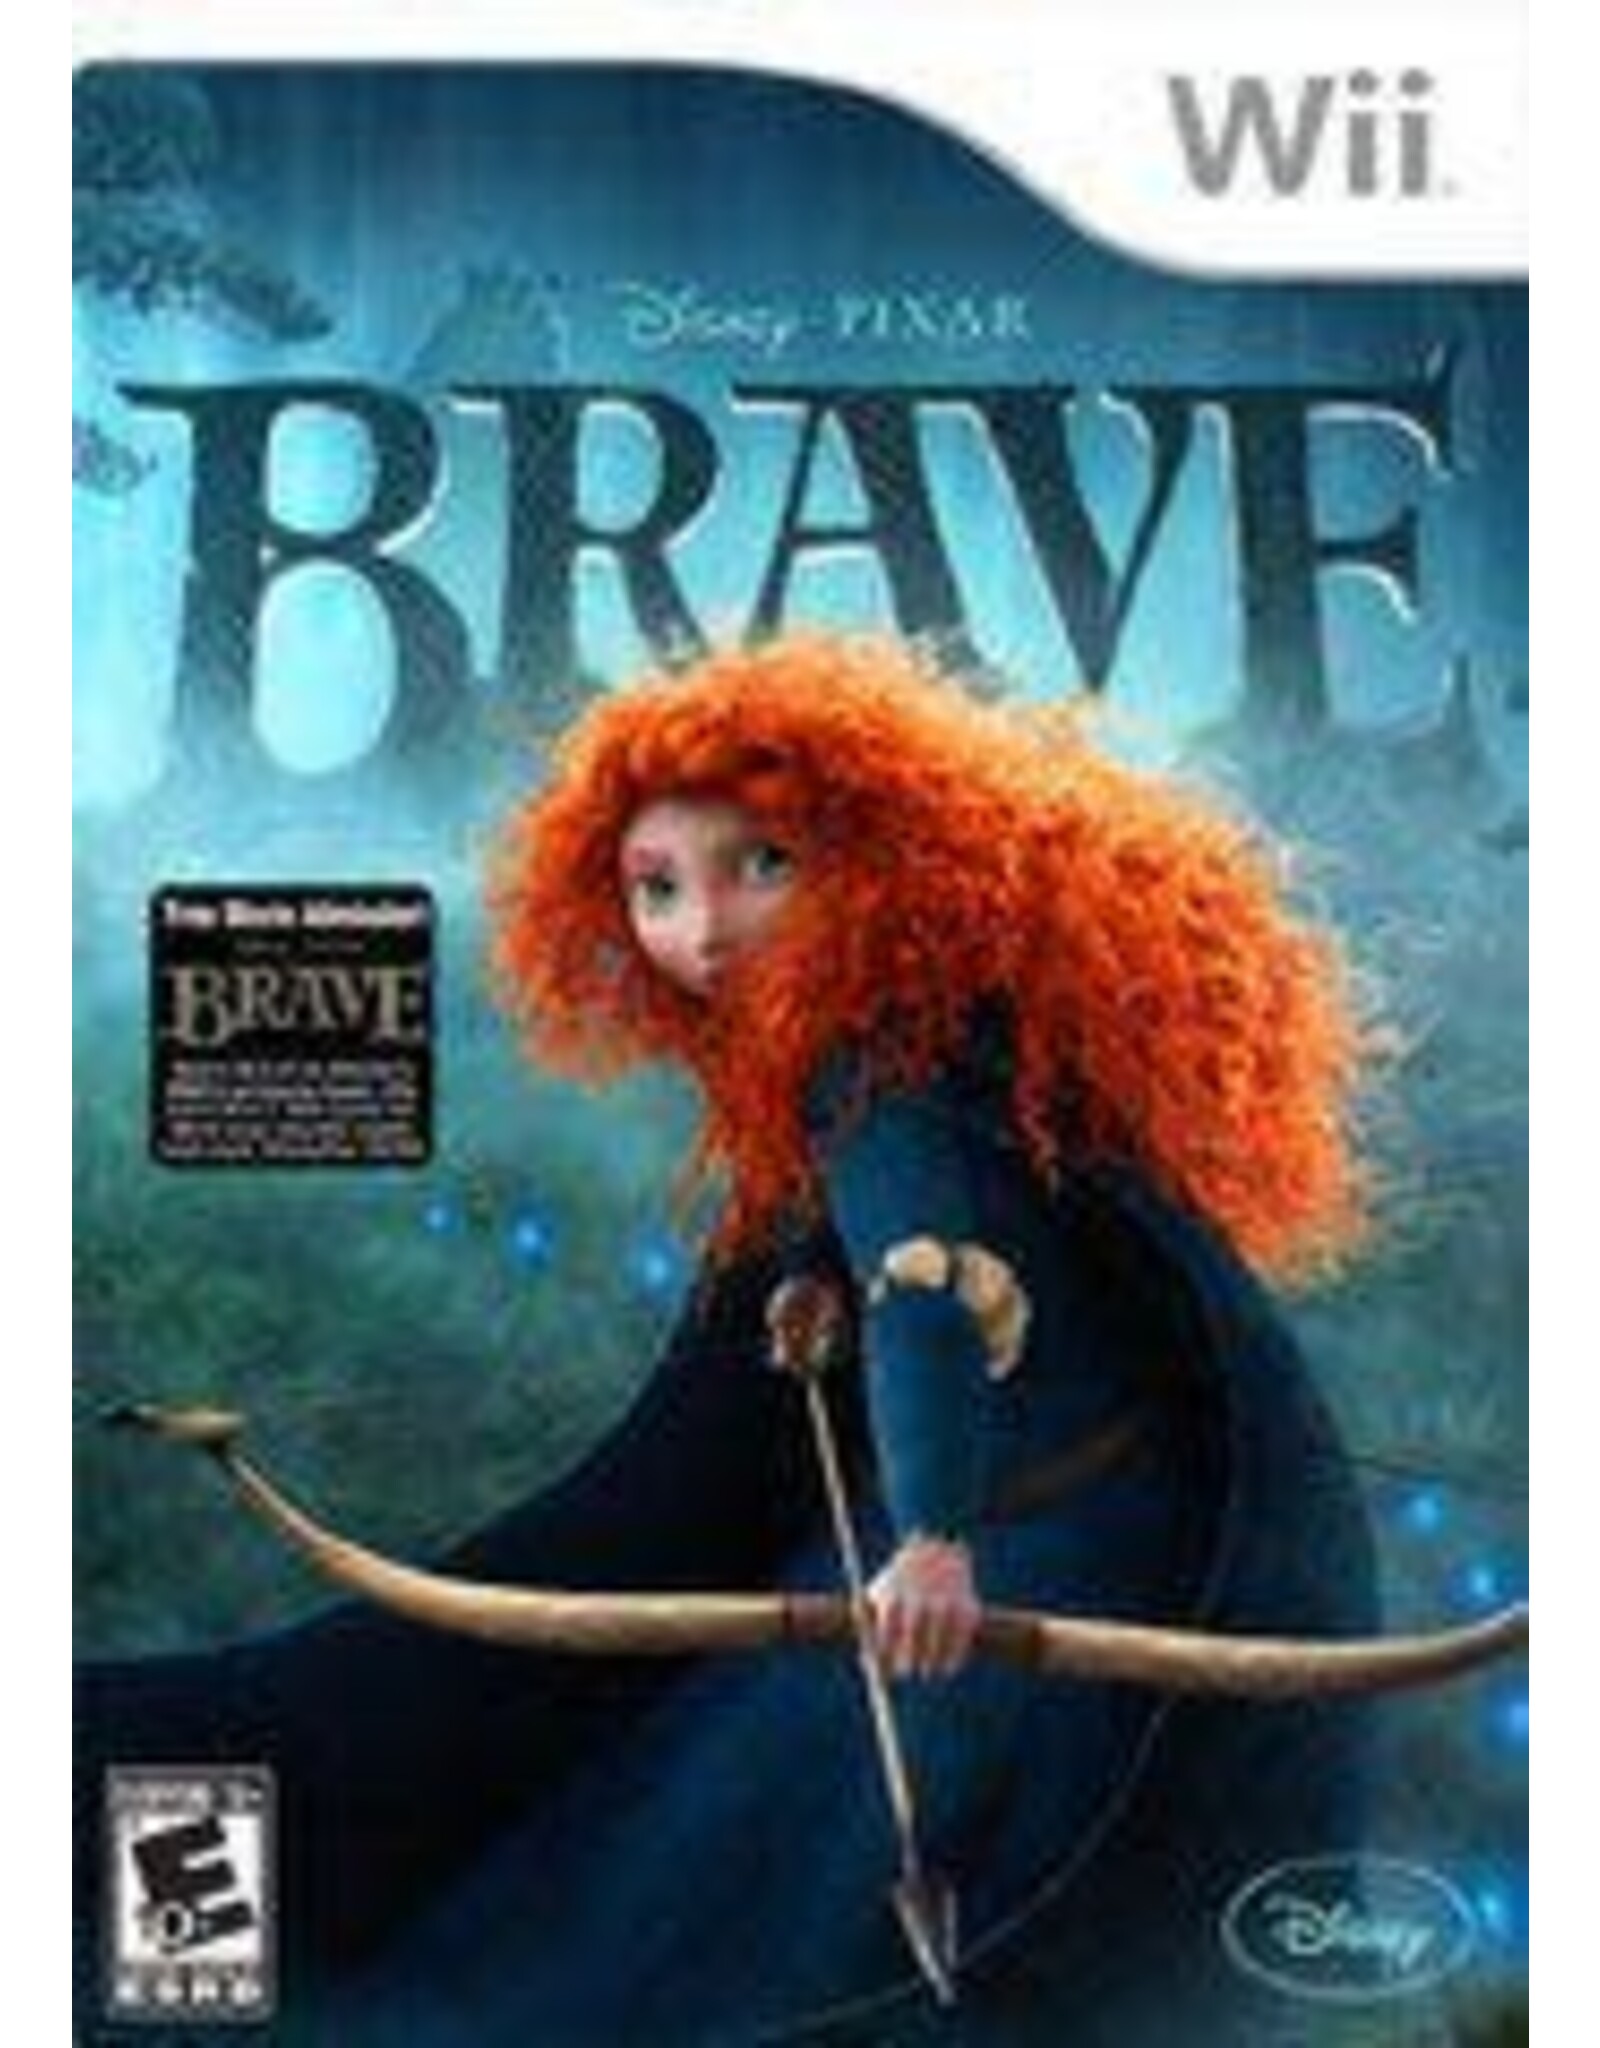 Wii Brave The Video Game (No Manual)